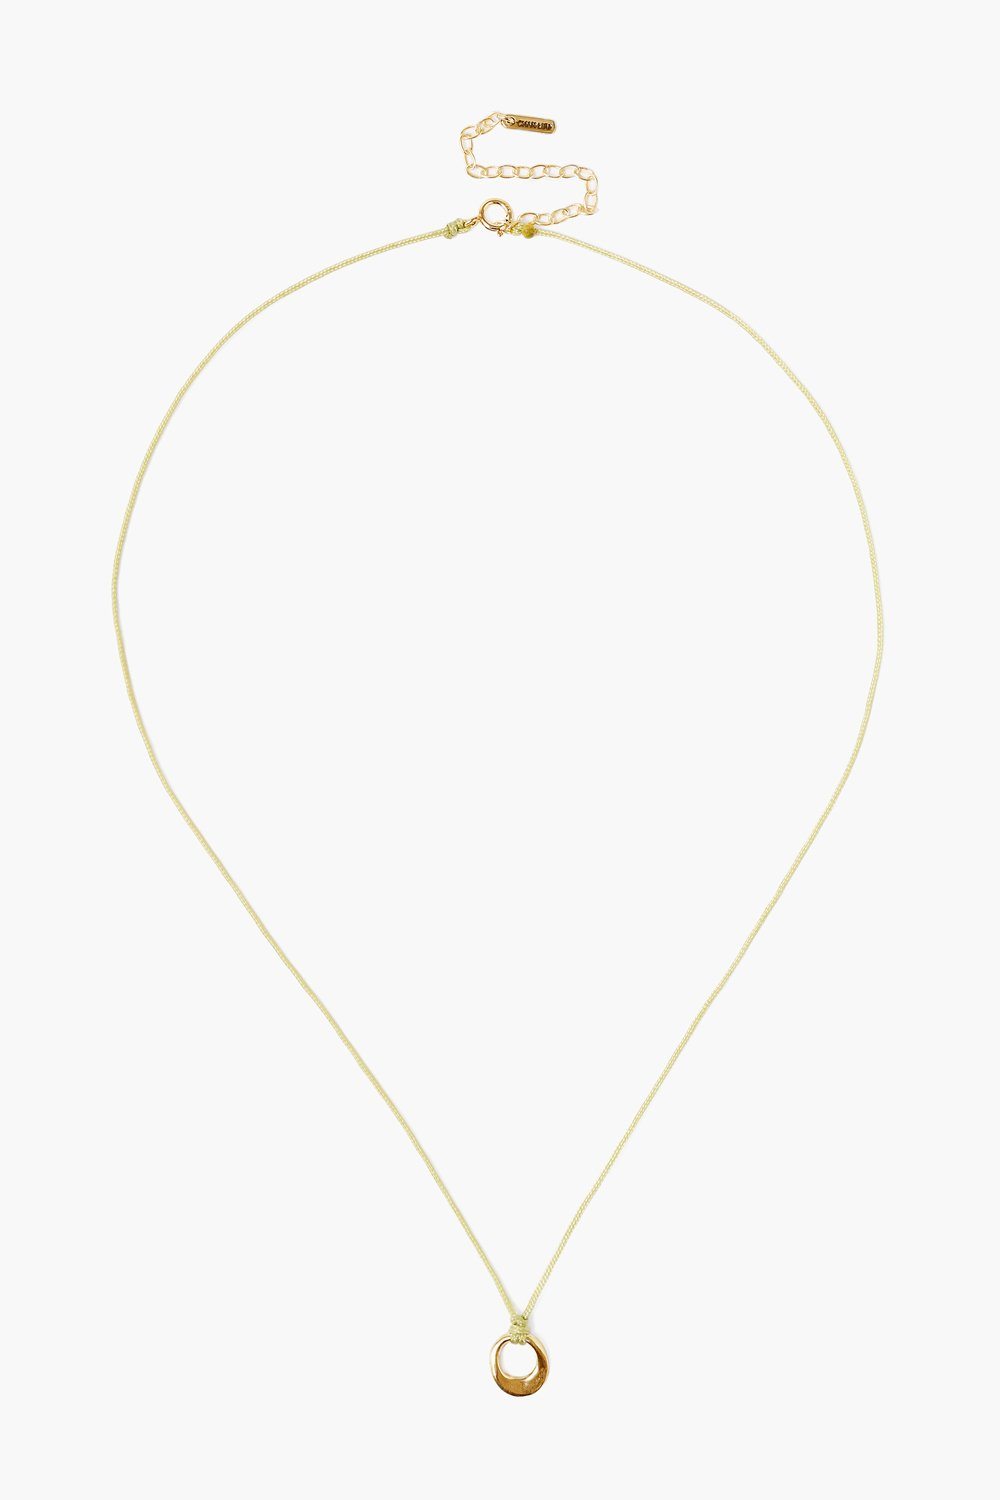 GOLD SOLITAIRE INFINITY LOOP NECKLACE